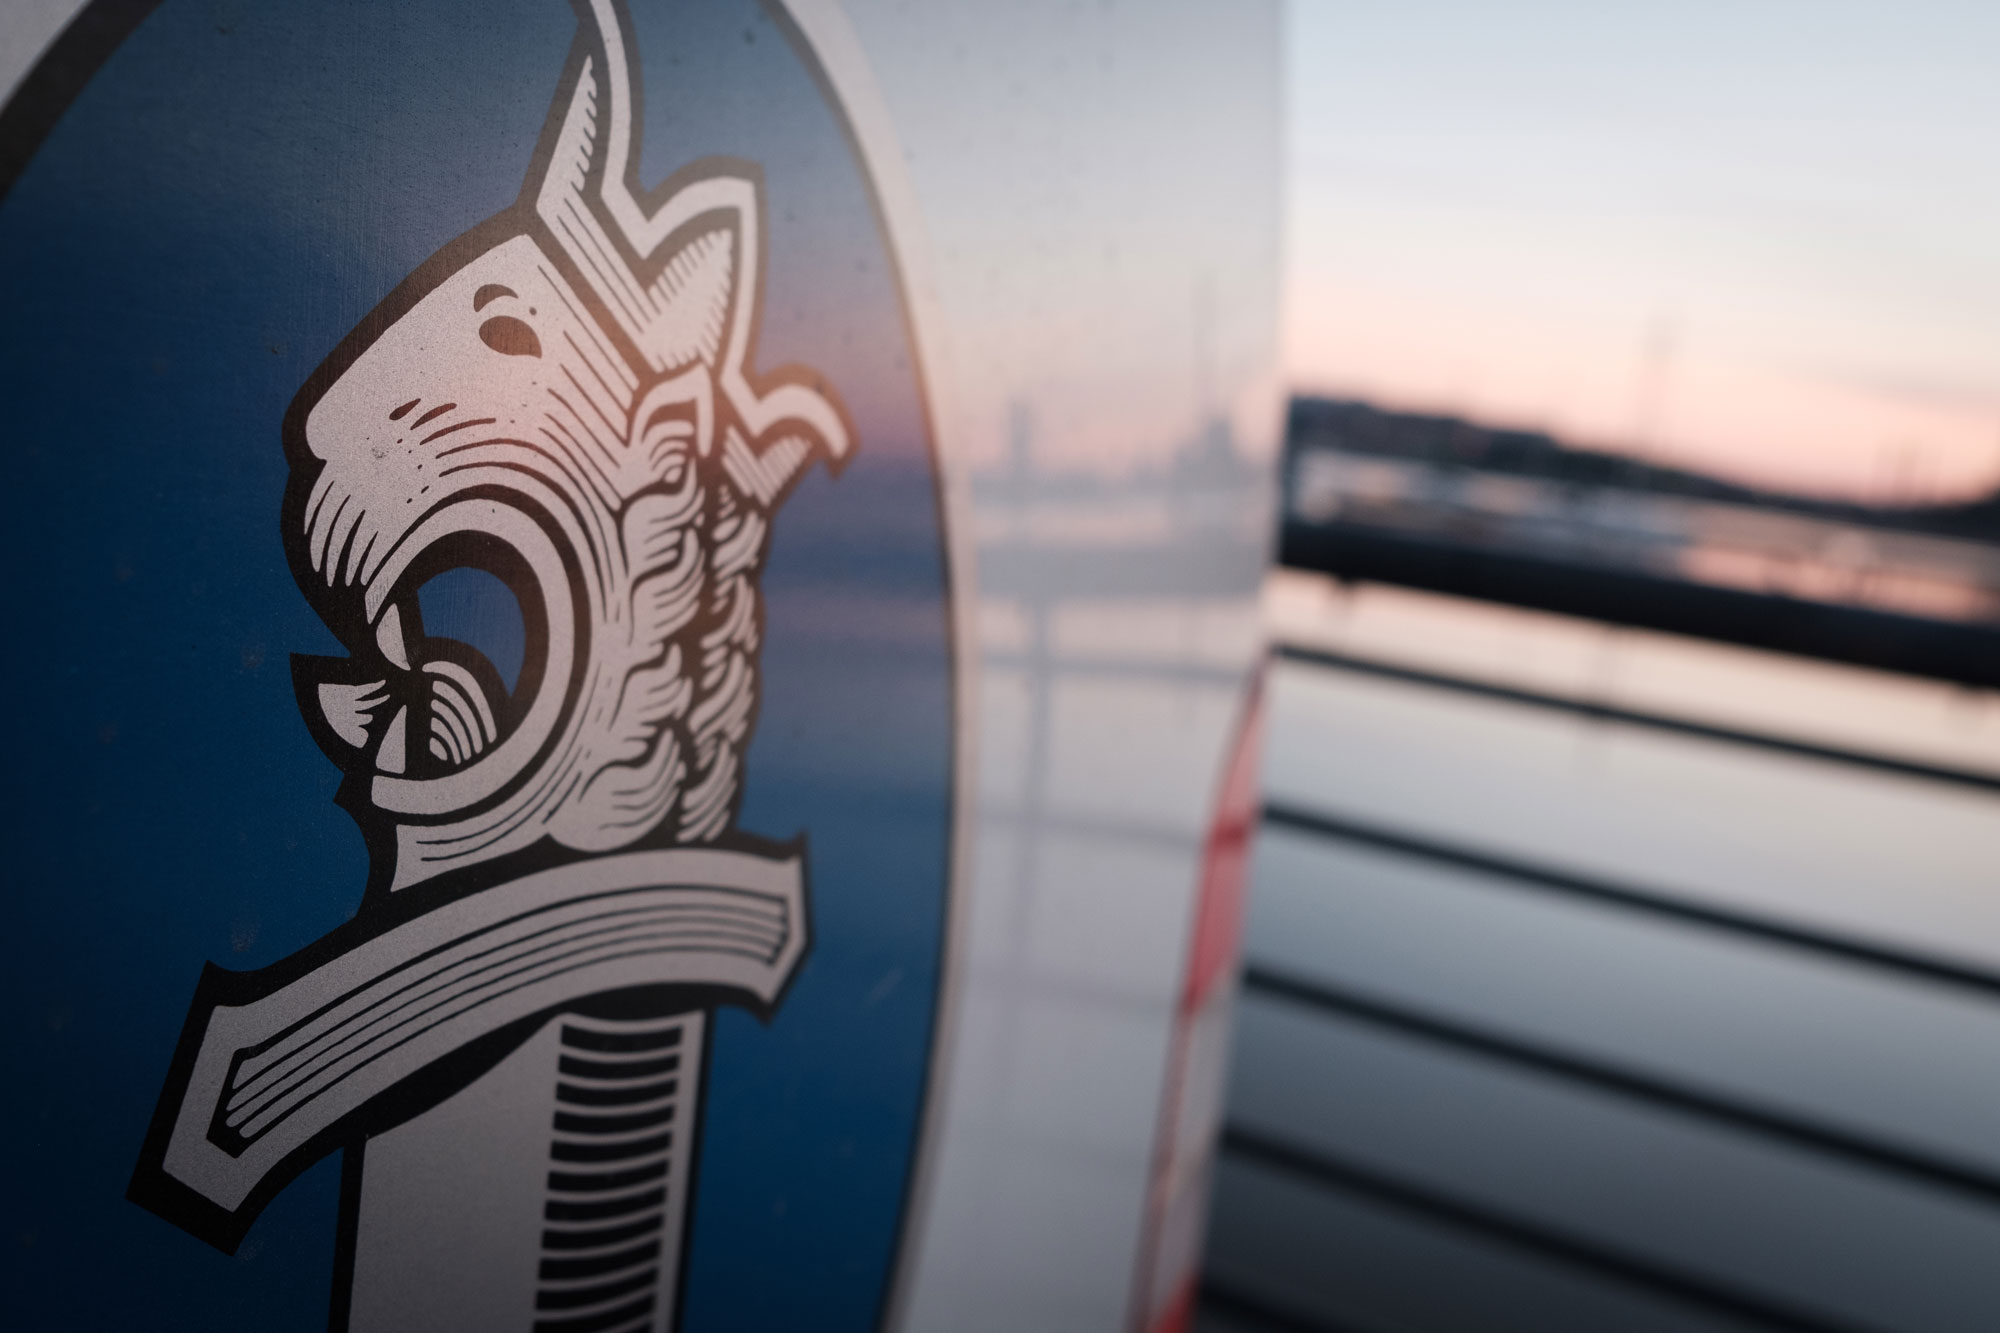 The sword-and-lion emblem on the side of a police car in the foreground with the sea in the background.